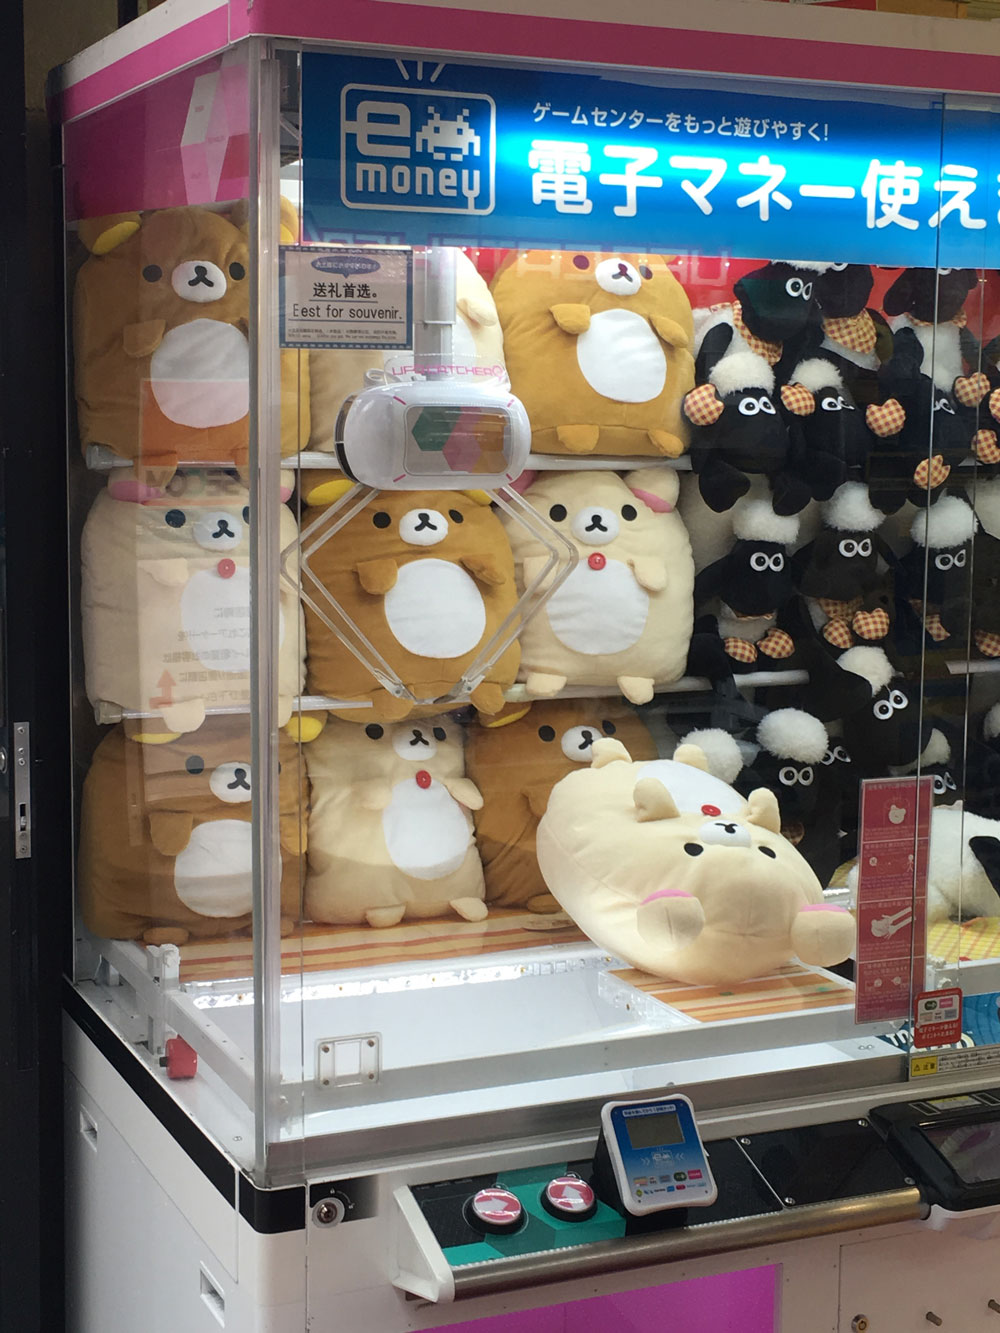 Vending machine filled with cute toys in Shinjuku